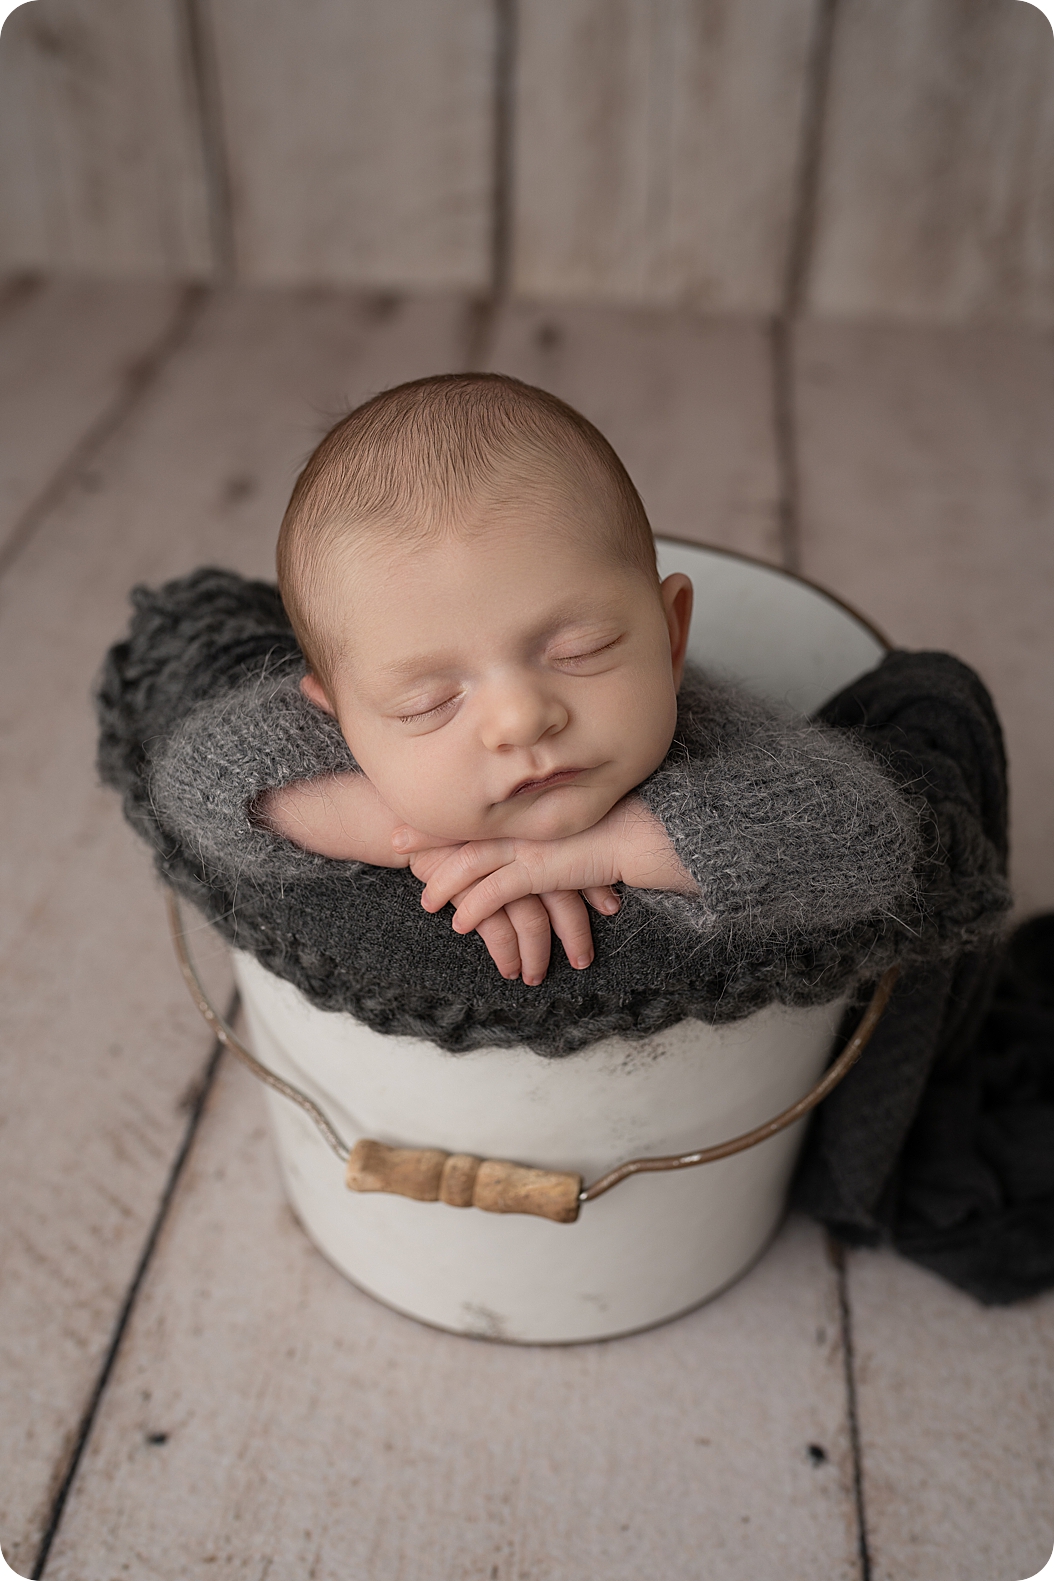 baby lays in bucket during neutral toned newborn session